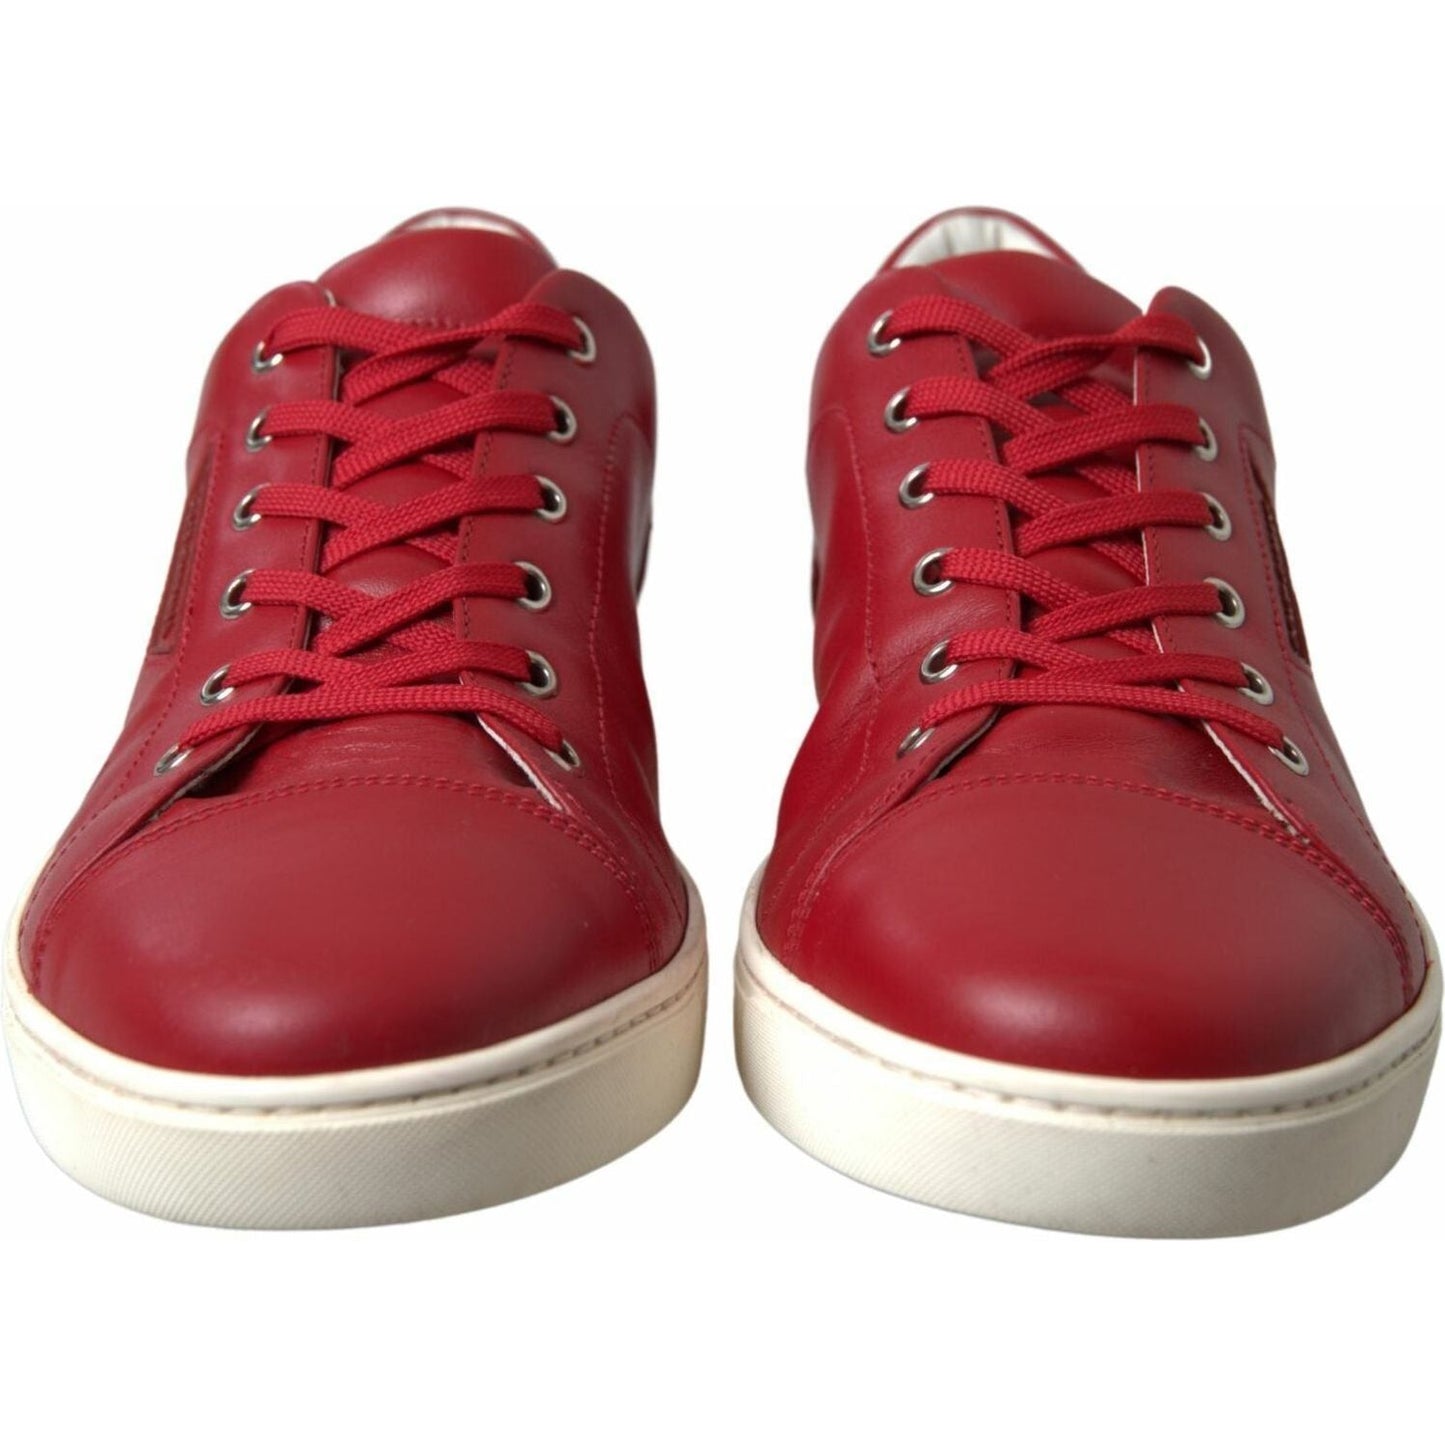 Dolce & Gabbana Elegant Red Leather Low Top Sneakers shoes-red-portofino-leather-low-top-mens-sneakers 4-scaled-3e8f33f5-df7.jpg